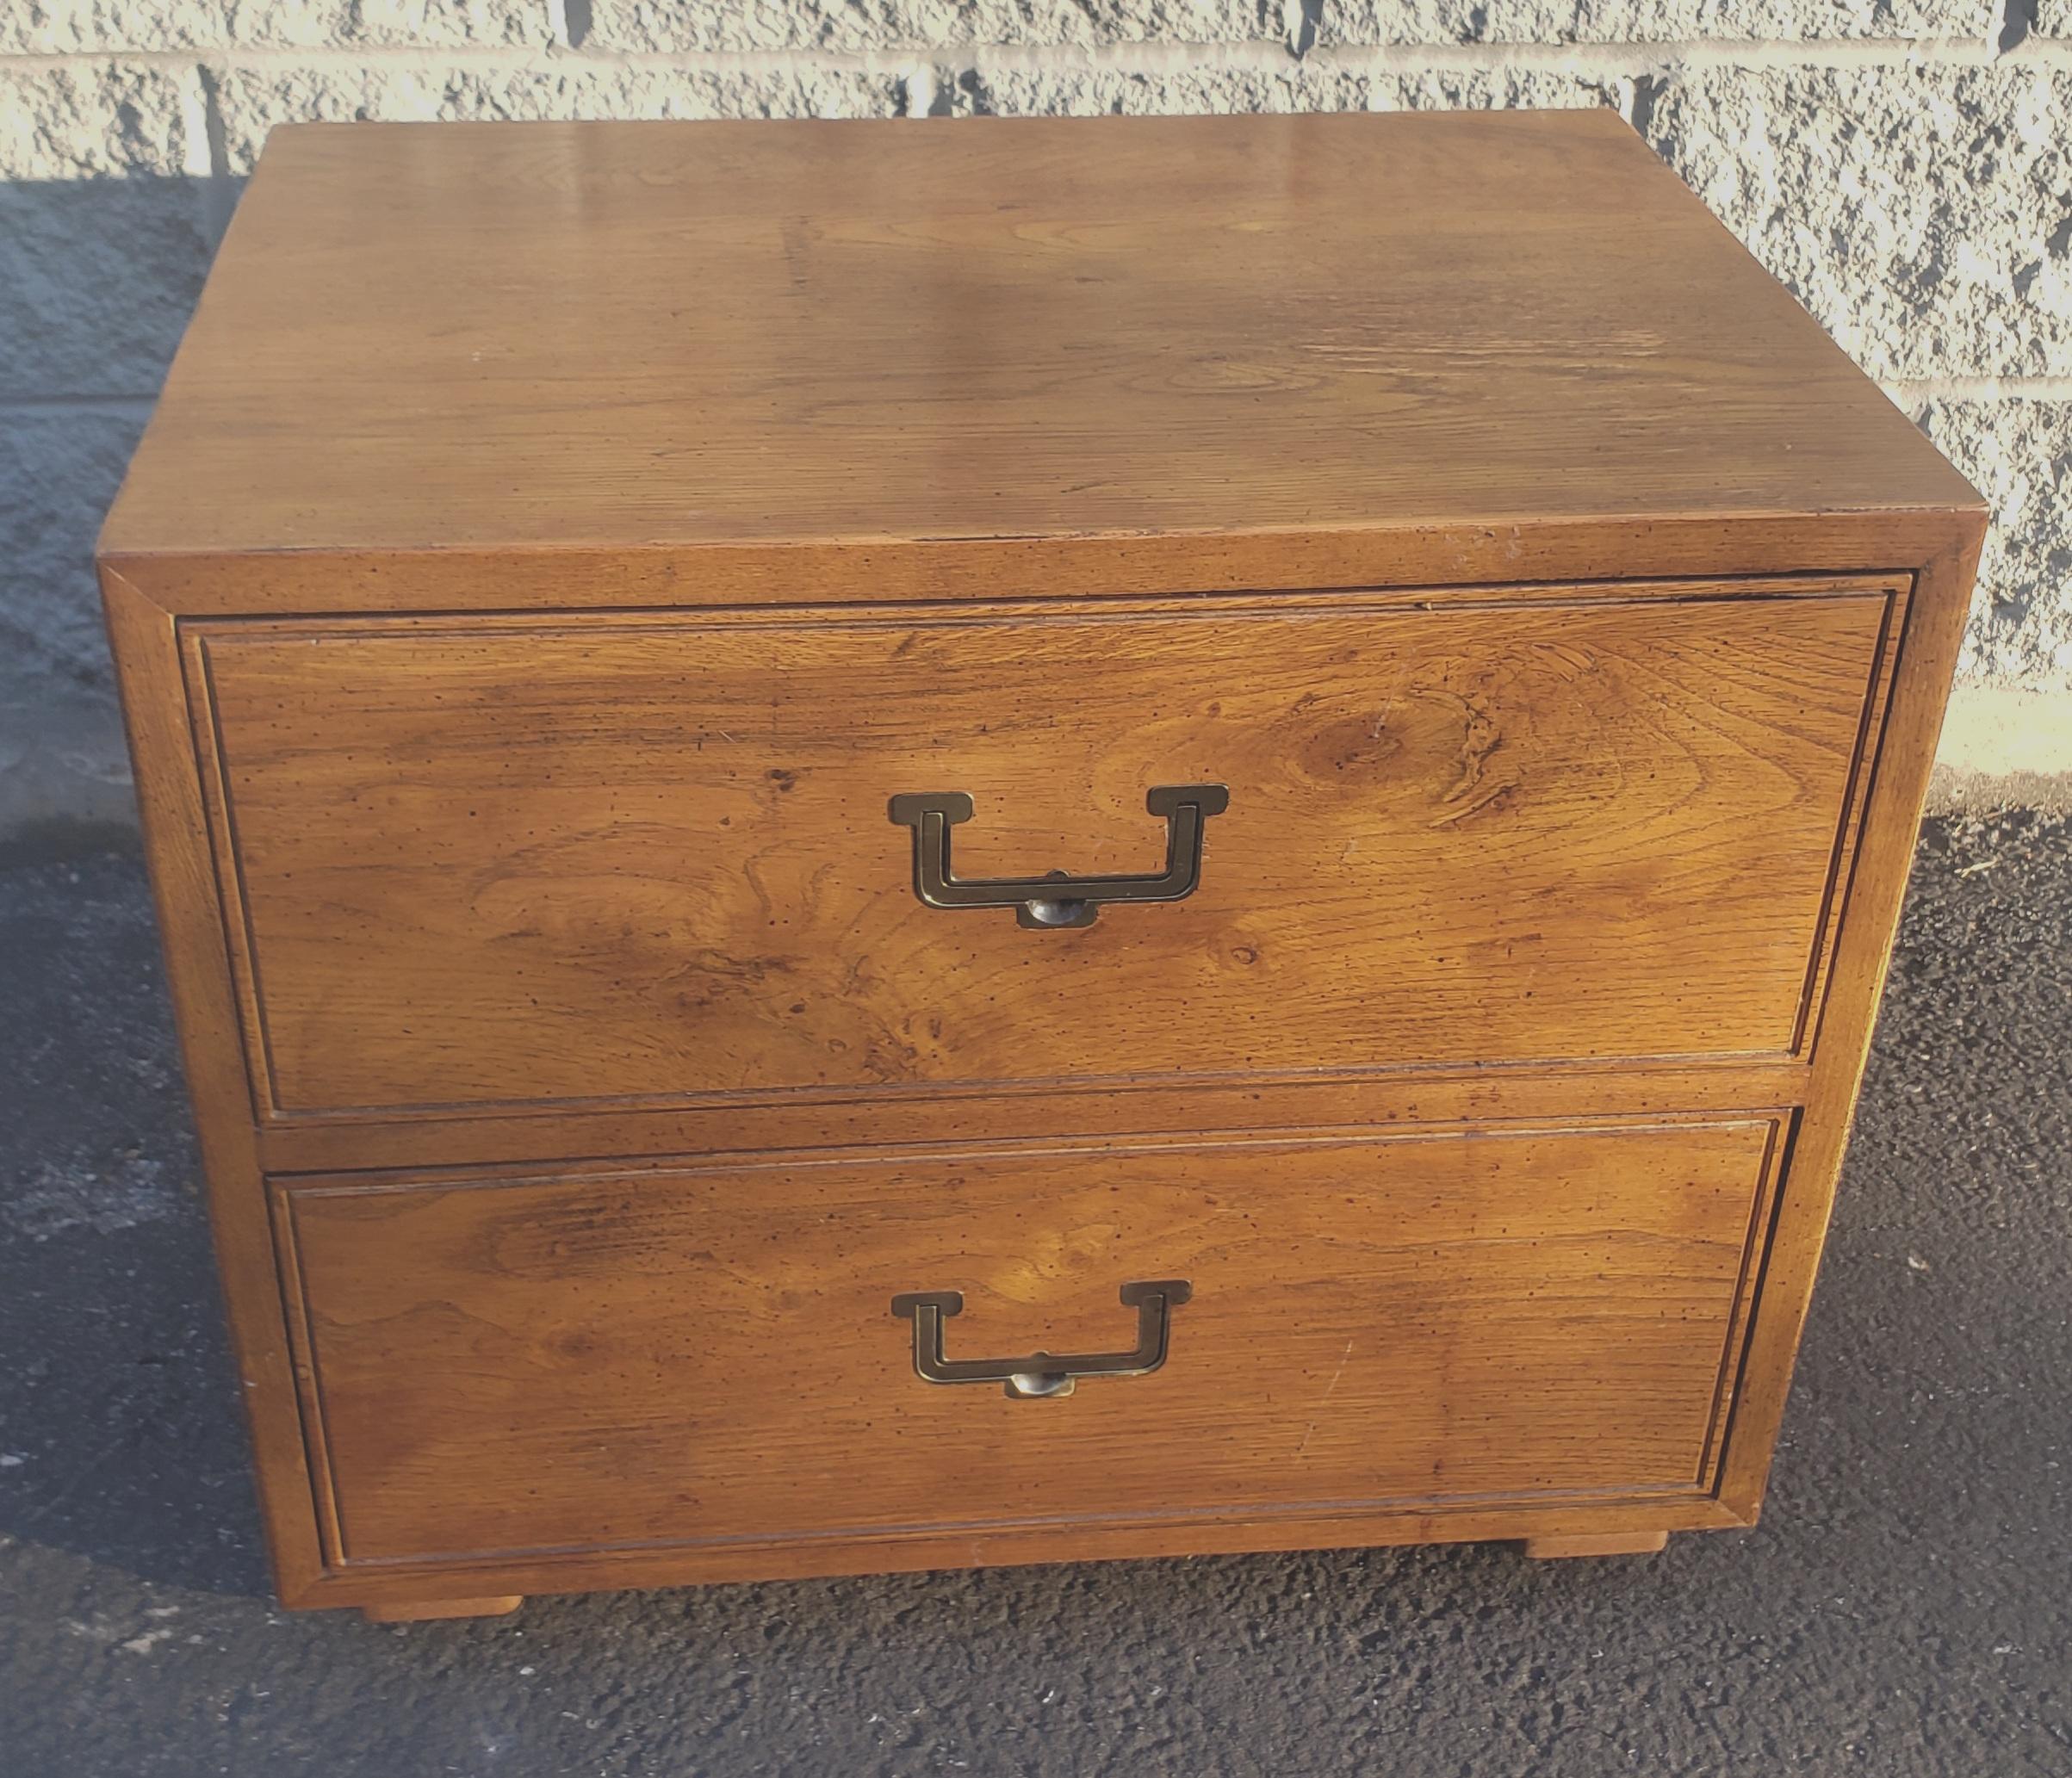 Nice Henrendon fine furniture oak and brass bedside chest nightstand form the n Artefact collection / good vintage condition. Some wear on top, commensurate with age and use. Measures 25